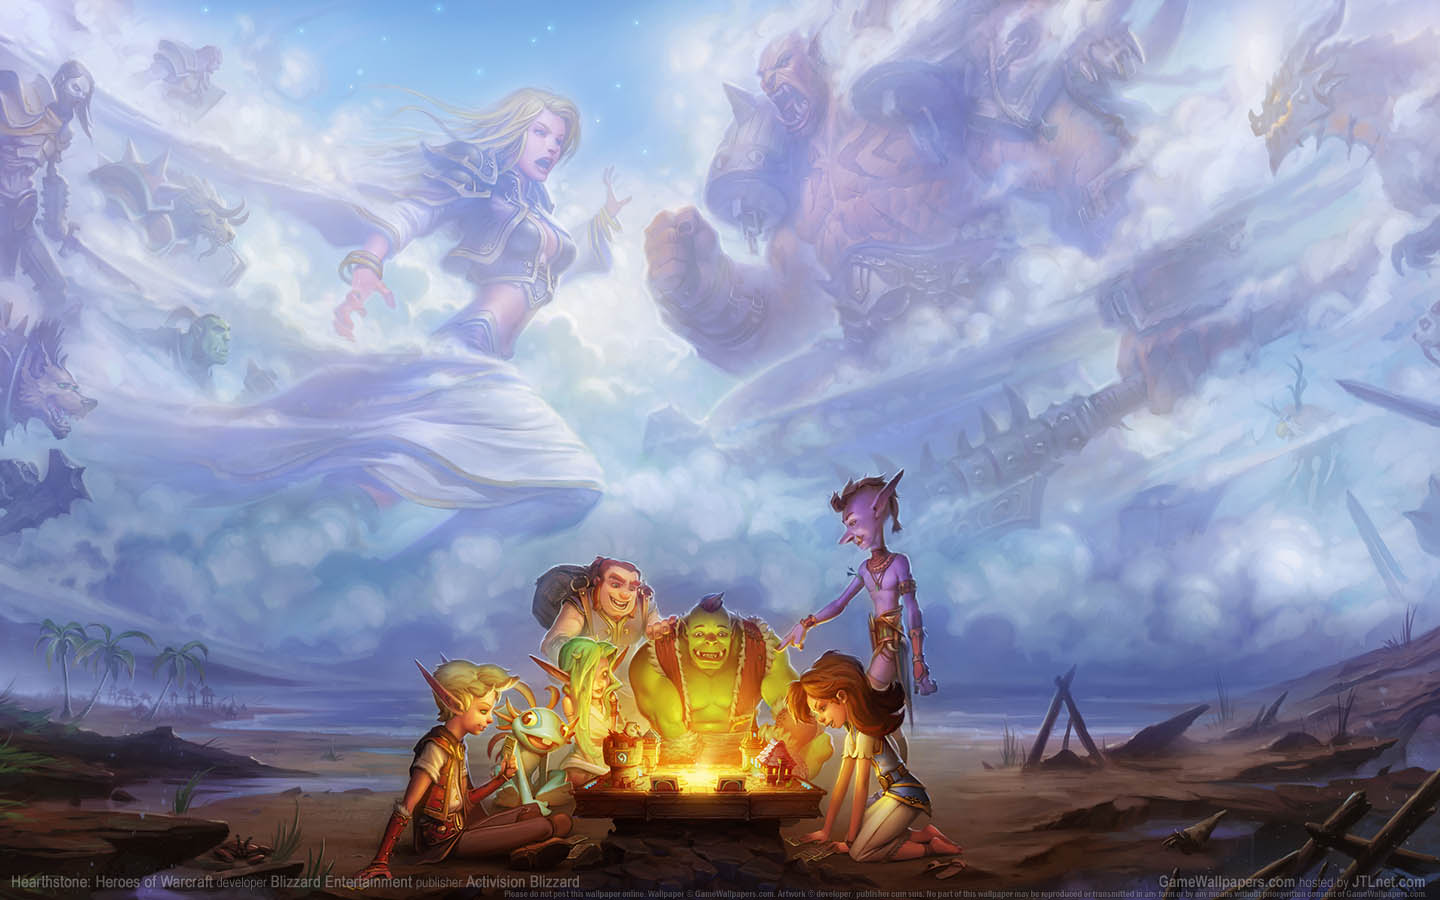 Hearthstone: Heroes of Warcraft achtergrond 09 1440x900